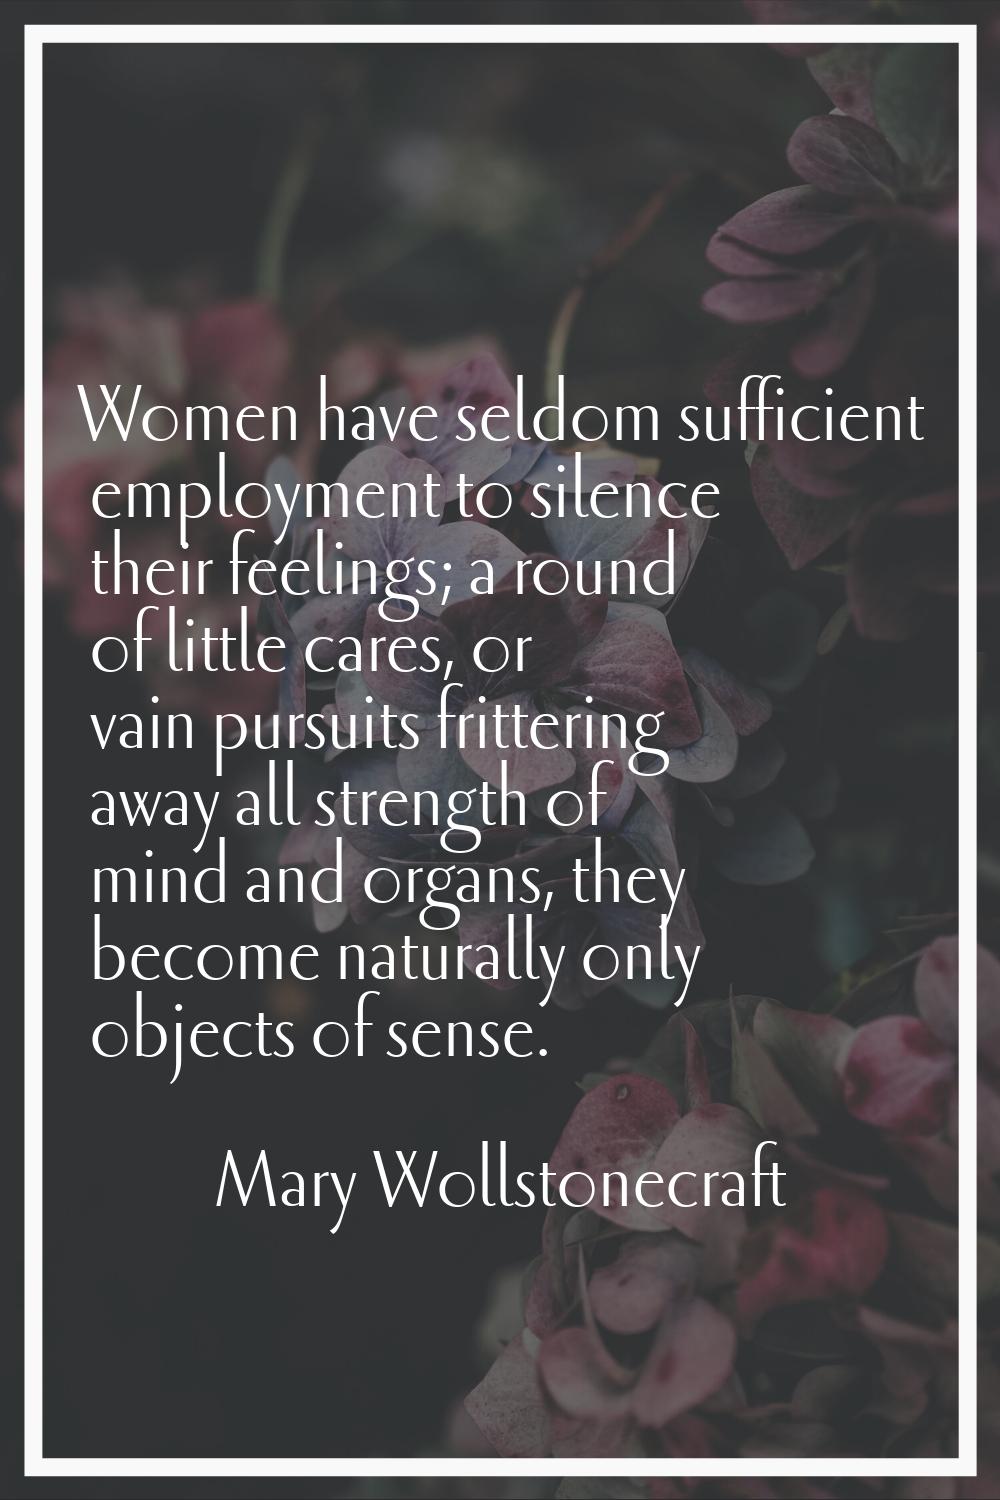 Women have seldom sufficient employment to silence their feelings; a round of little cares, or vain